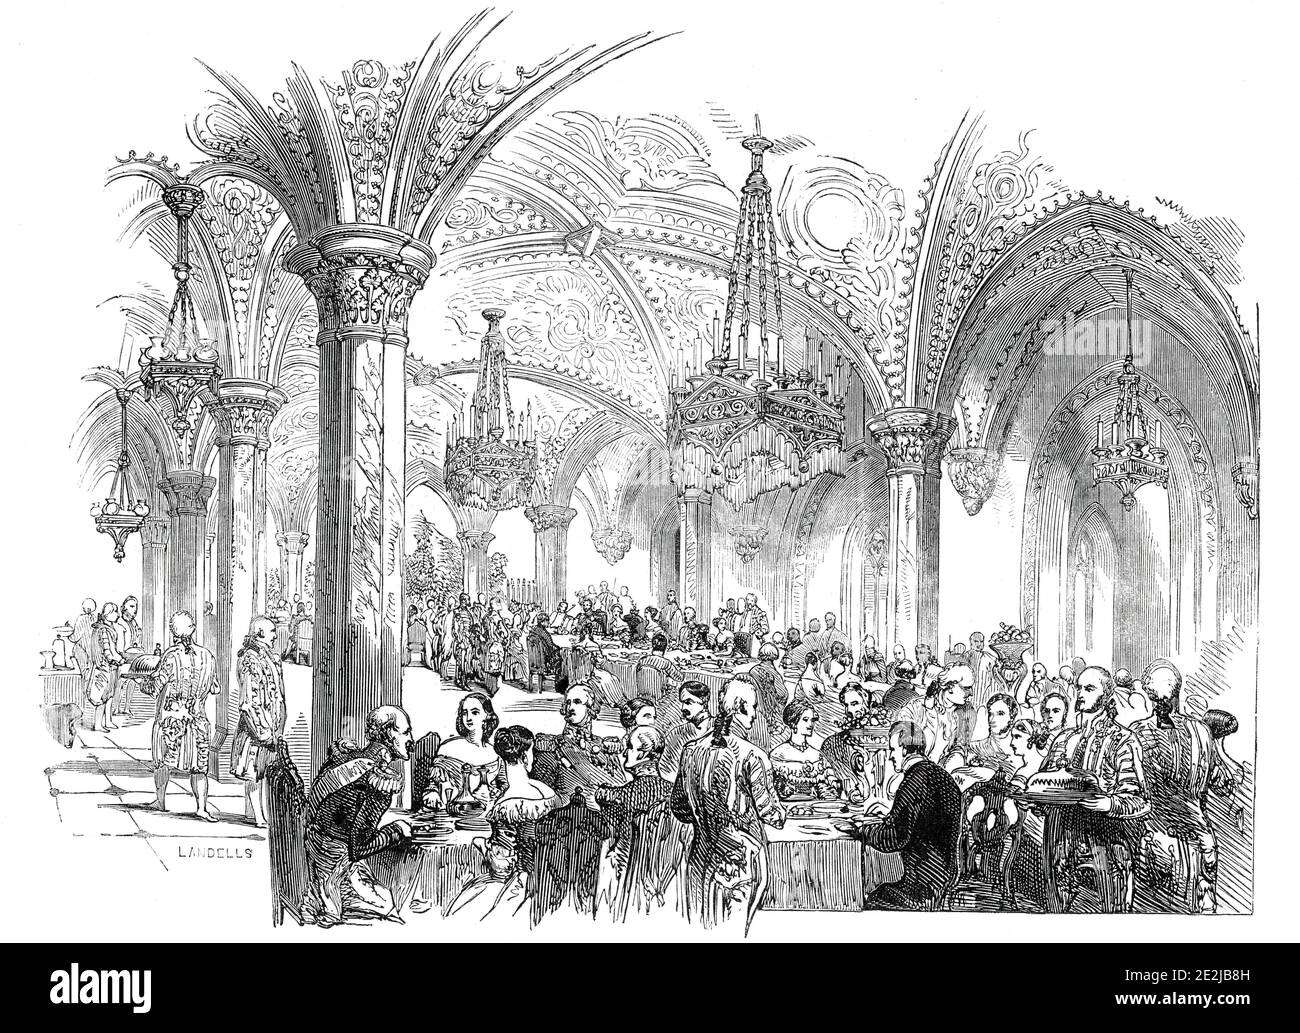 The Royal Banquet, at Rosenau, 1845. Dinner at the birthplace and boyhood home of Prince Albert in Germany. From &quot;Illustrated London News&quot;, 1845, Vol VII. Stock Photo